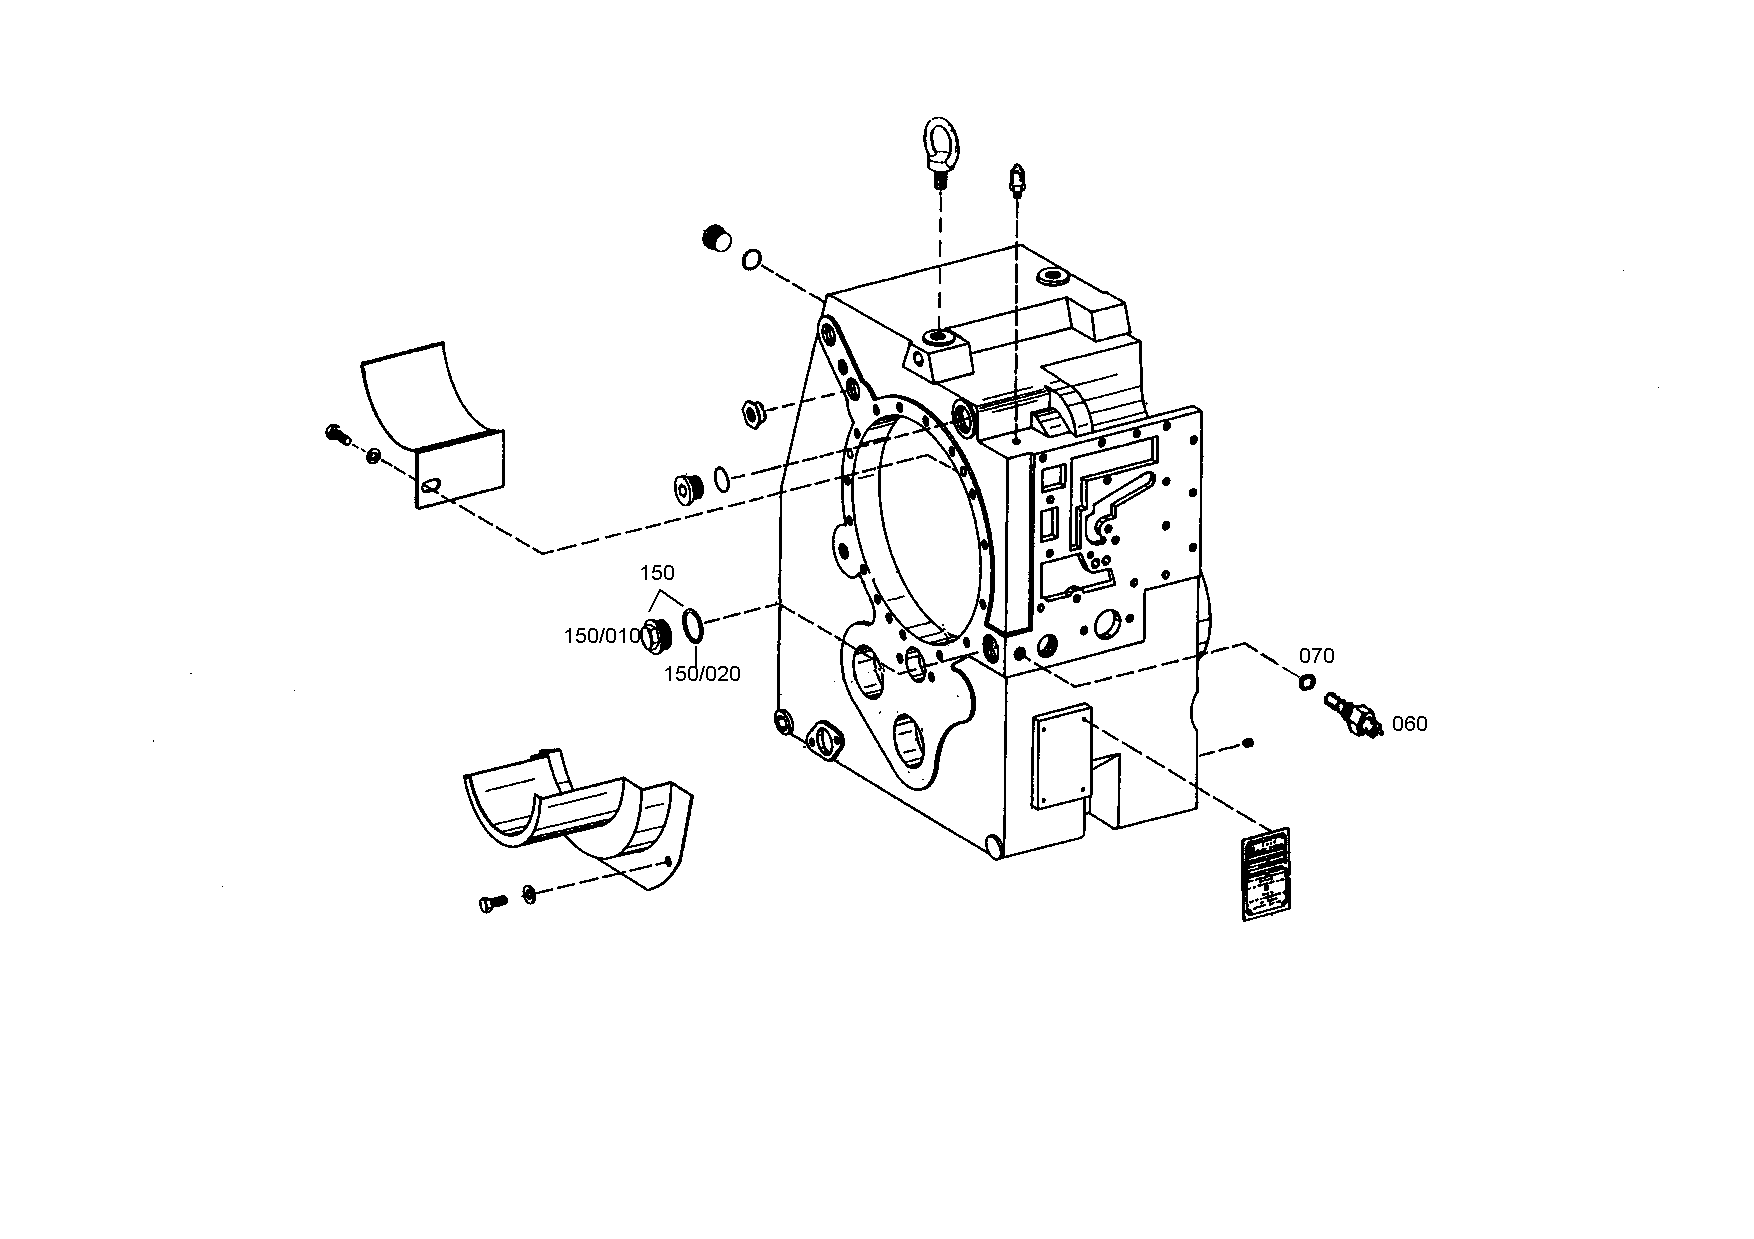 drawing for Manitowoc Crane Group Germany 02315171 - THERMO-SCHALTER (figure 5)